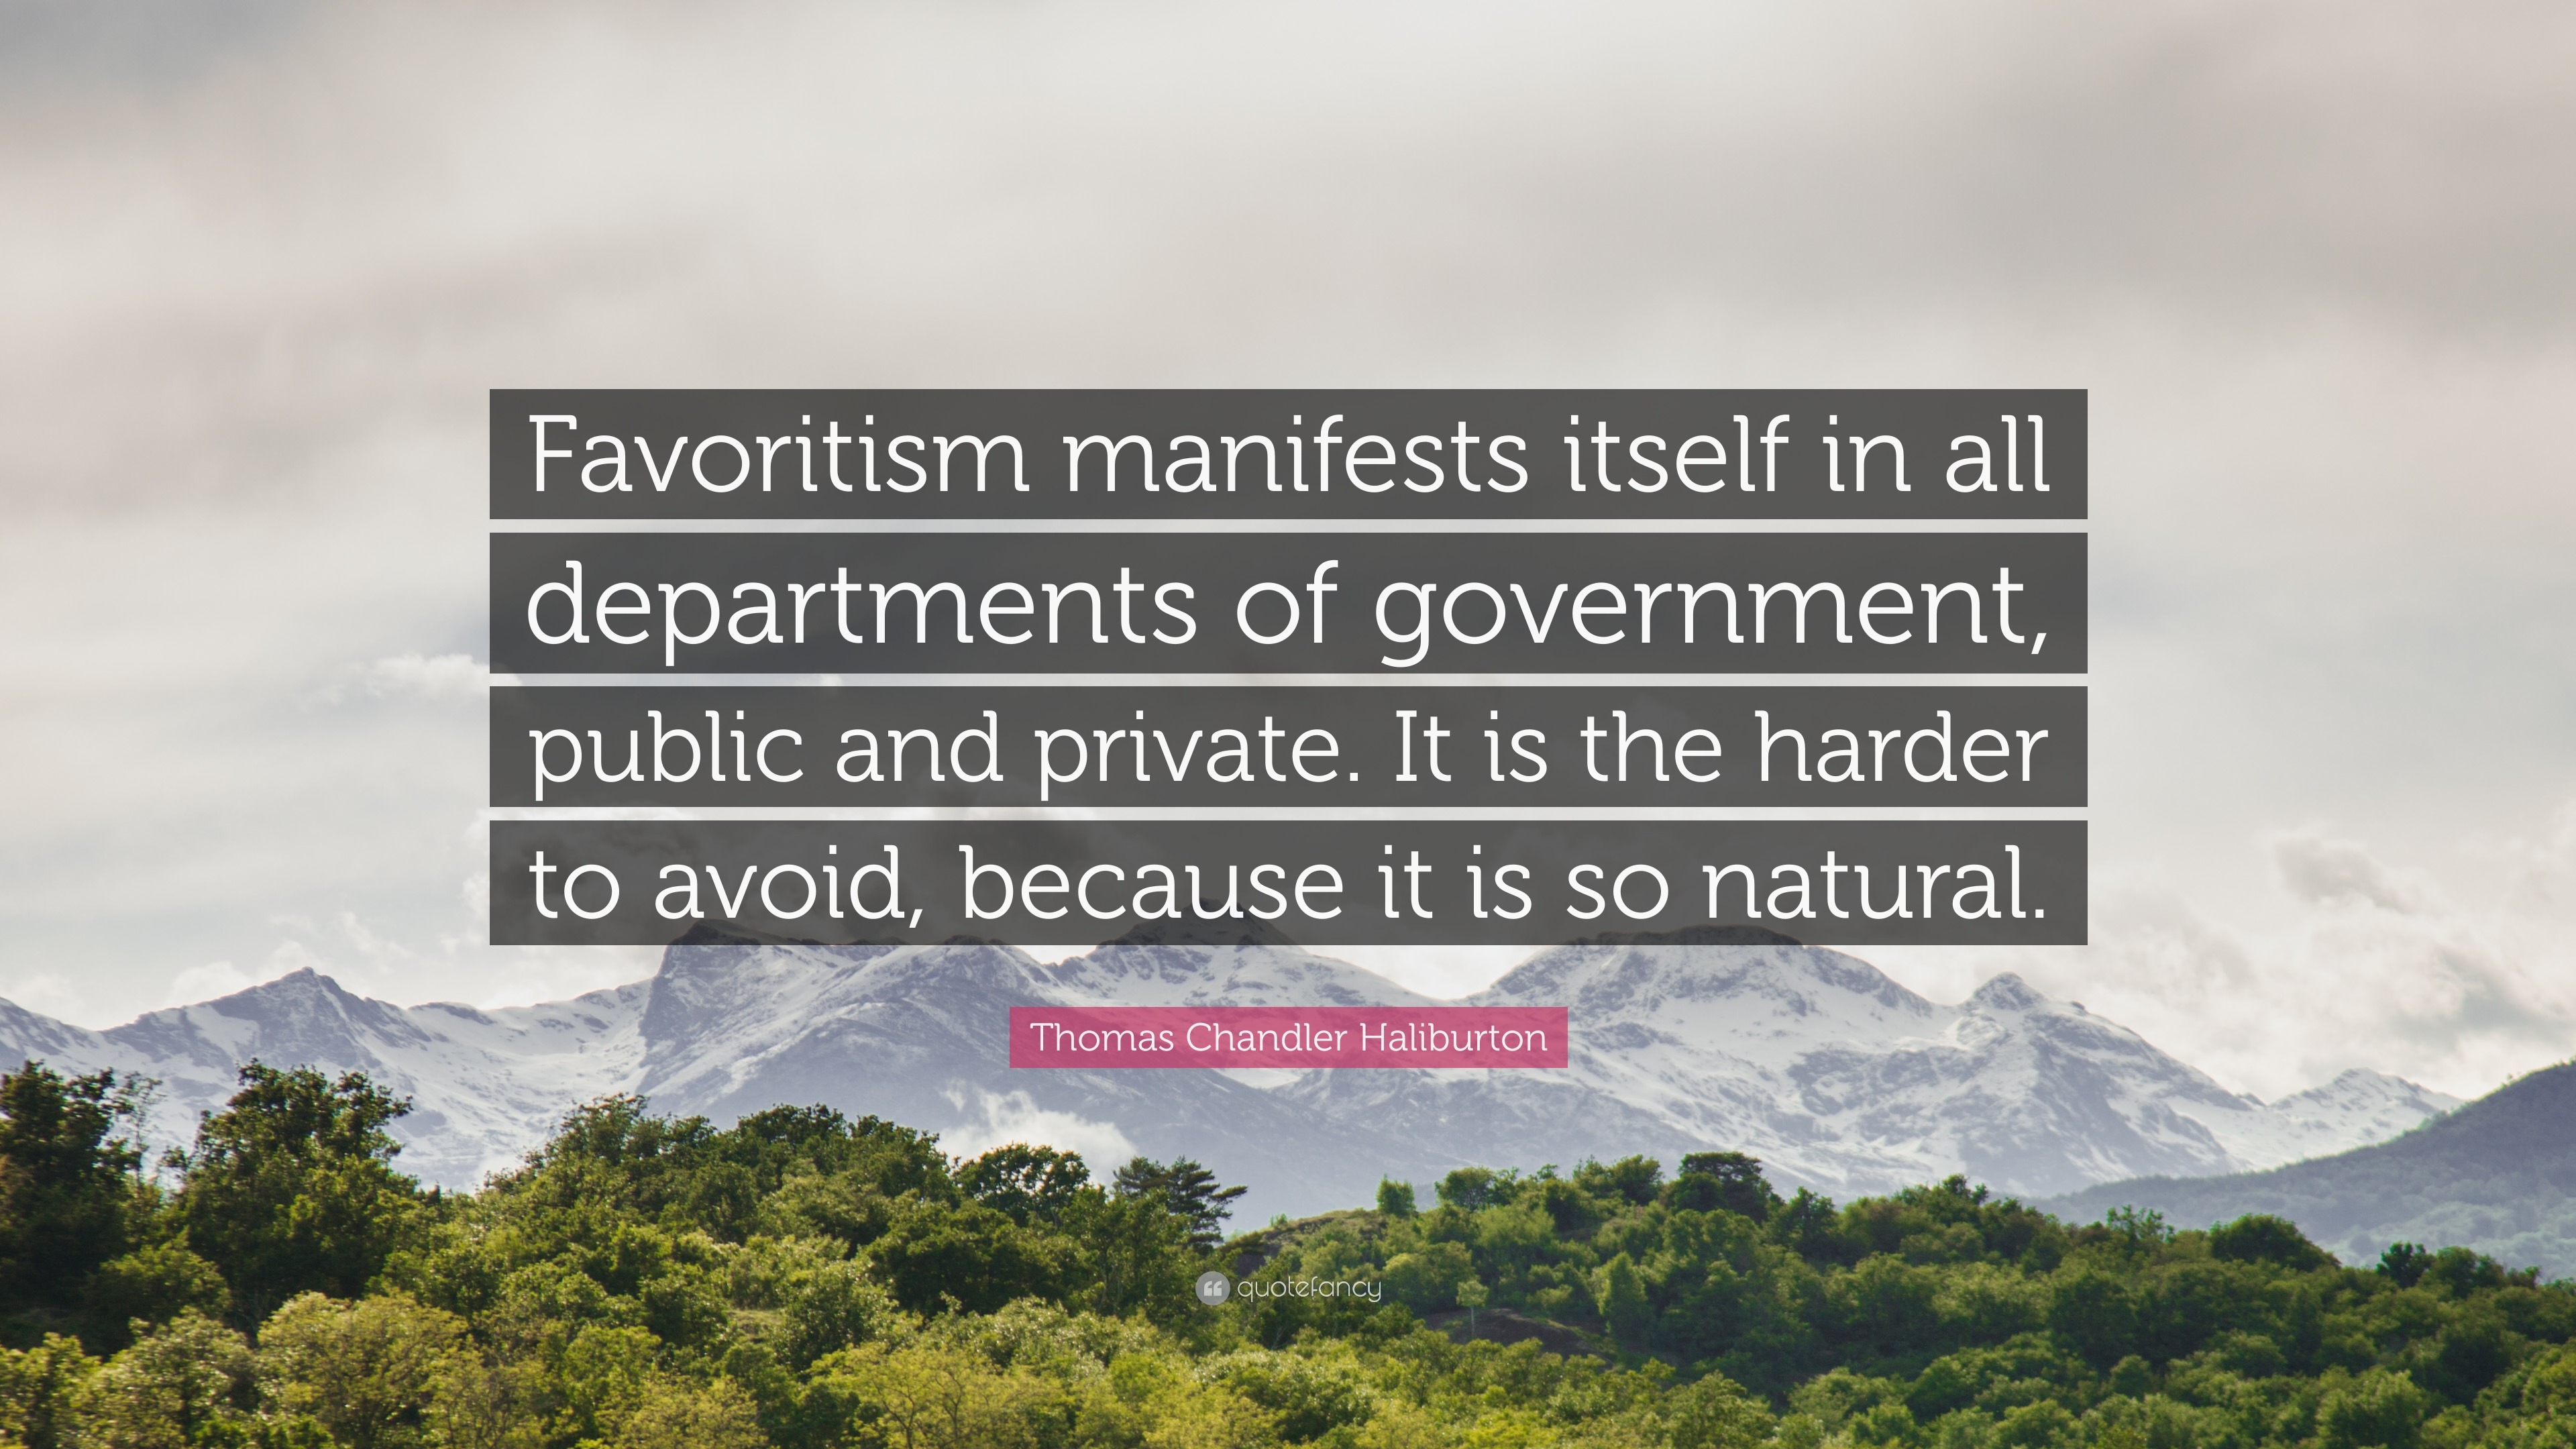 Thomas Chandler Haliburton Quote: “Favoritism manifests itself in all  departments of government, public and private. It is the harder to avoid,  because it ”